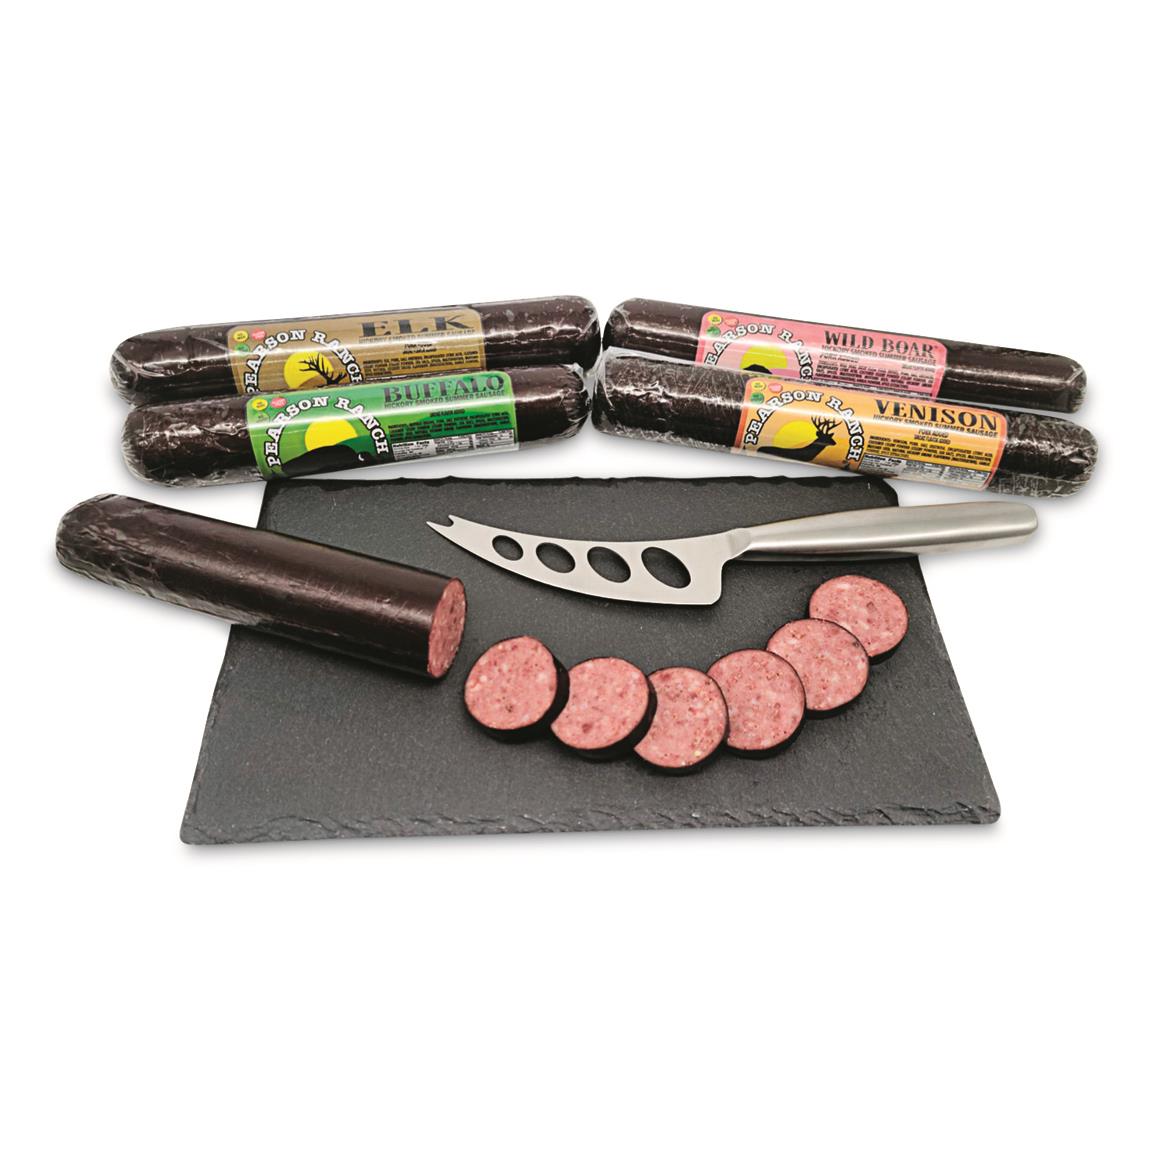 Pearson Ranch Wild Game Sampler Kit with Cutting Board and Knife